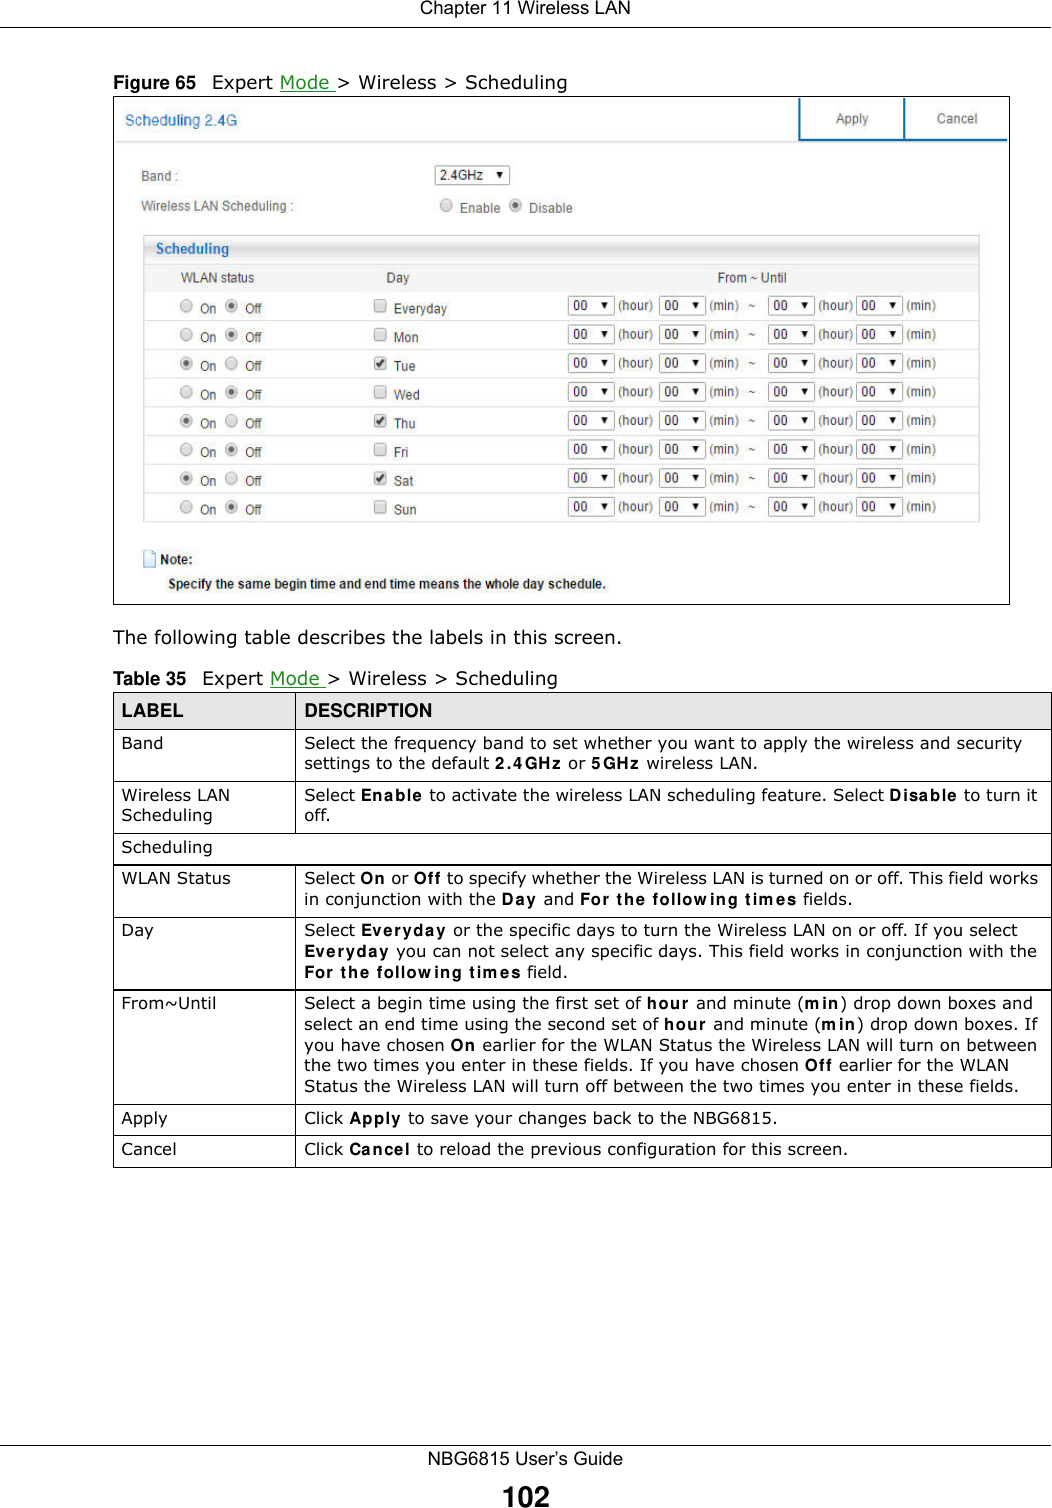 Chapter 11 Wireless LANNBG6815 User’s Guide102Figure 65   Expert Mode &gt; Wireless &gt; SchedulingThe following table describes the labels in this screen.Table 35   Expert Mode &gt; Wireless &gt; SchedulingLABEL DESCRIPTIONBand Select the frequency band to set whether you want to apply the wireless and security settings to the default 2.4GHz or 5GHz wireless LAN. Wireless LAN SchedulingSelect Enable to activate the wireless LAN scheduling feature. Select Disable to turn it off.SchedulingWLAN Status Select On or Off to specify whether the Wireless LAN is turned on or off. This field works in conjunction with the Day and For the following times fields.Day Select Everyday or the specific days to turn the Wireless LAN on or off. If you select Everyday you can not select any specific days. This field works in conjunction with the For the following times field.From~Until Select a begin time using the first set of hour and minute (min) drop down boxes and select an end time using the second set of hour and minute (min) drop down boxes. If you have chosen On earlier for the WLAN Status the Wireless LAN will turn on between the two times you enter in these fields. If you have chosen Off earlier for the WLAN Status the Wireless LAN will turn off between the two times you enter in these fields. Apply Click Apply to save your changes back to the NBG6815.Cancel Click Cancel to reload the previous configuration for this screen.